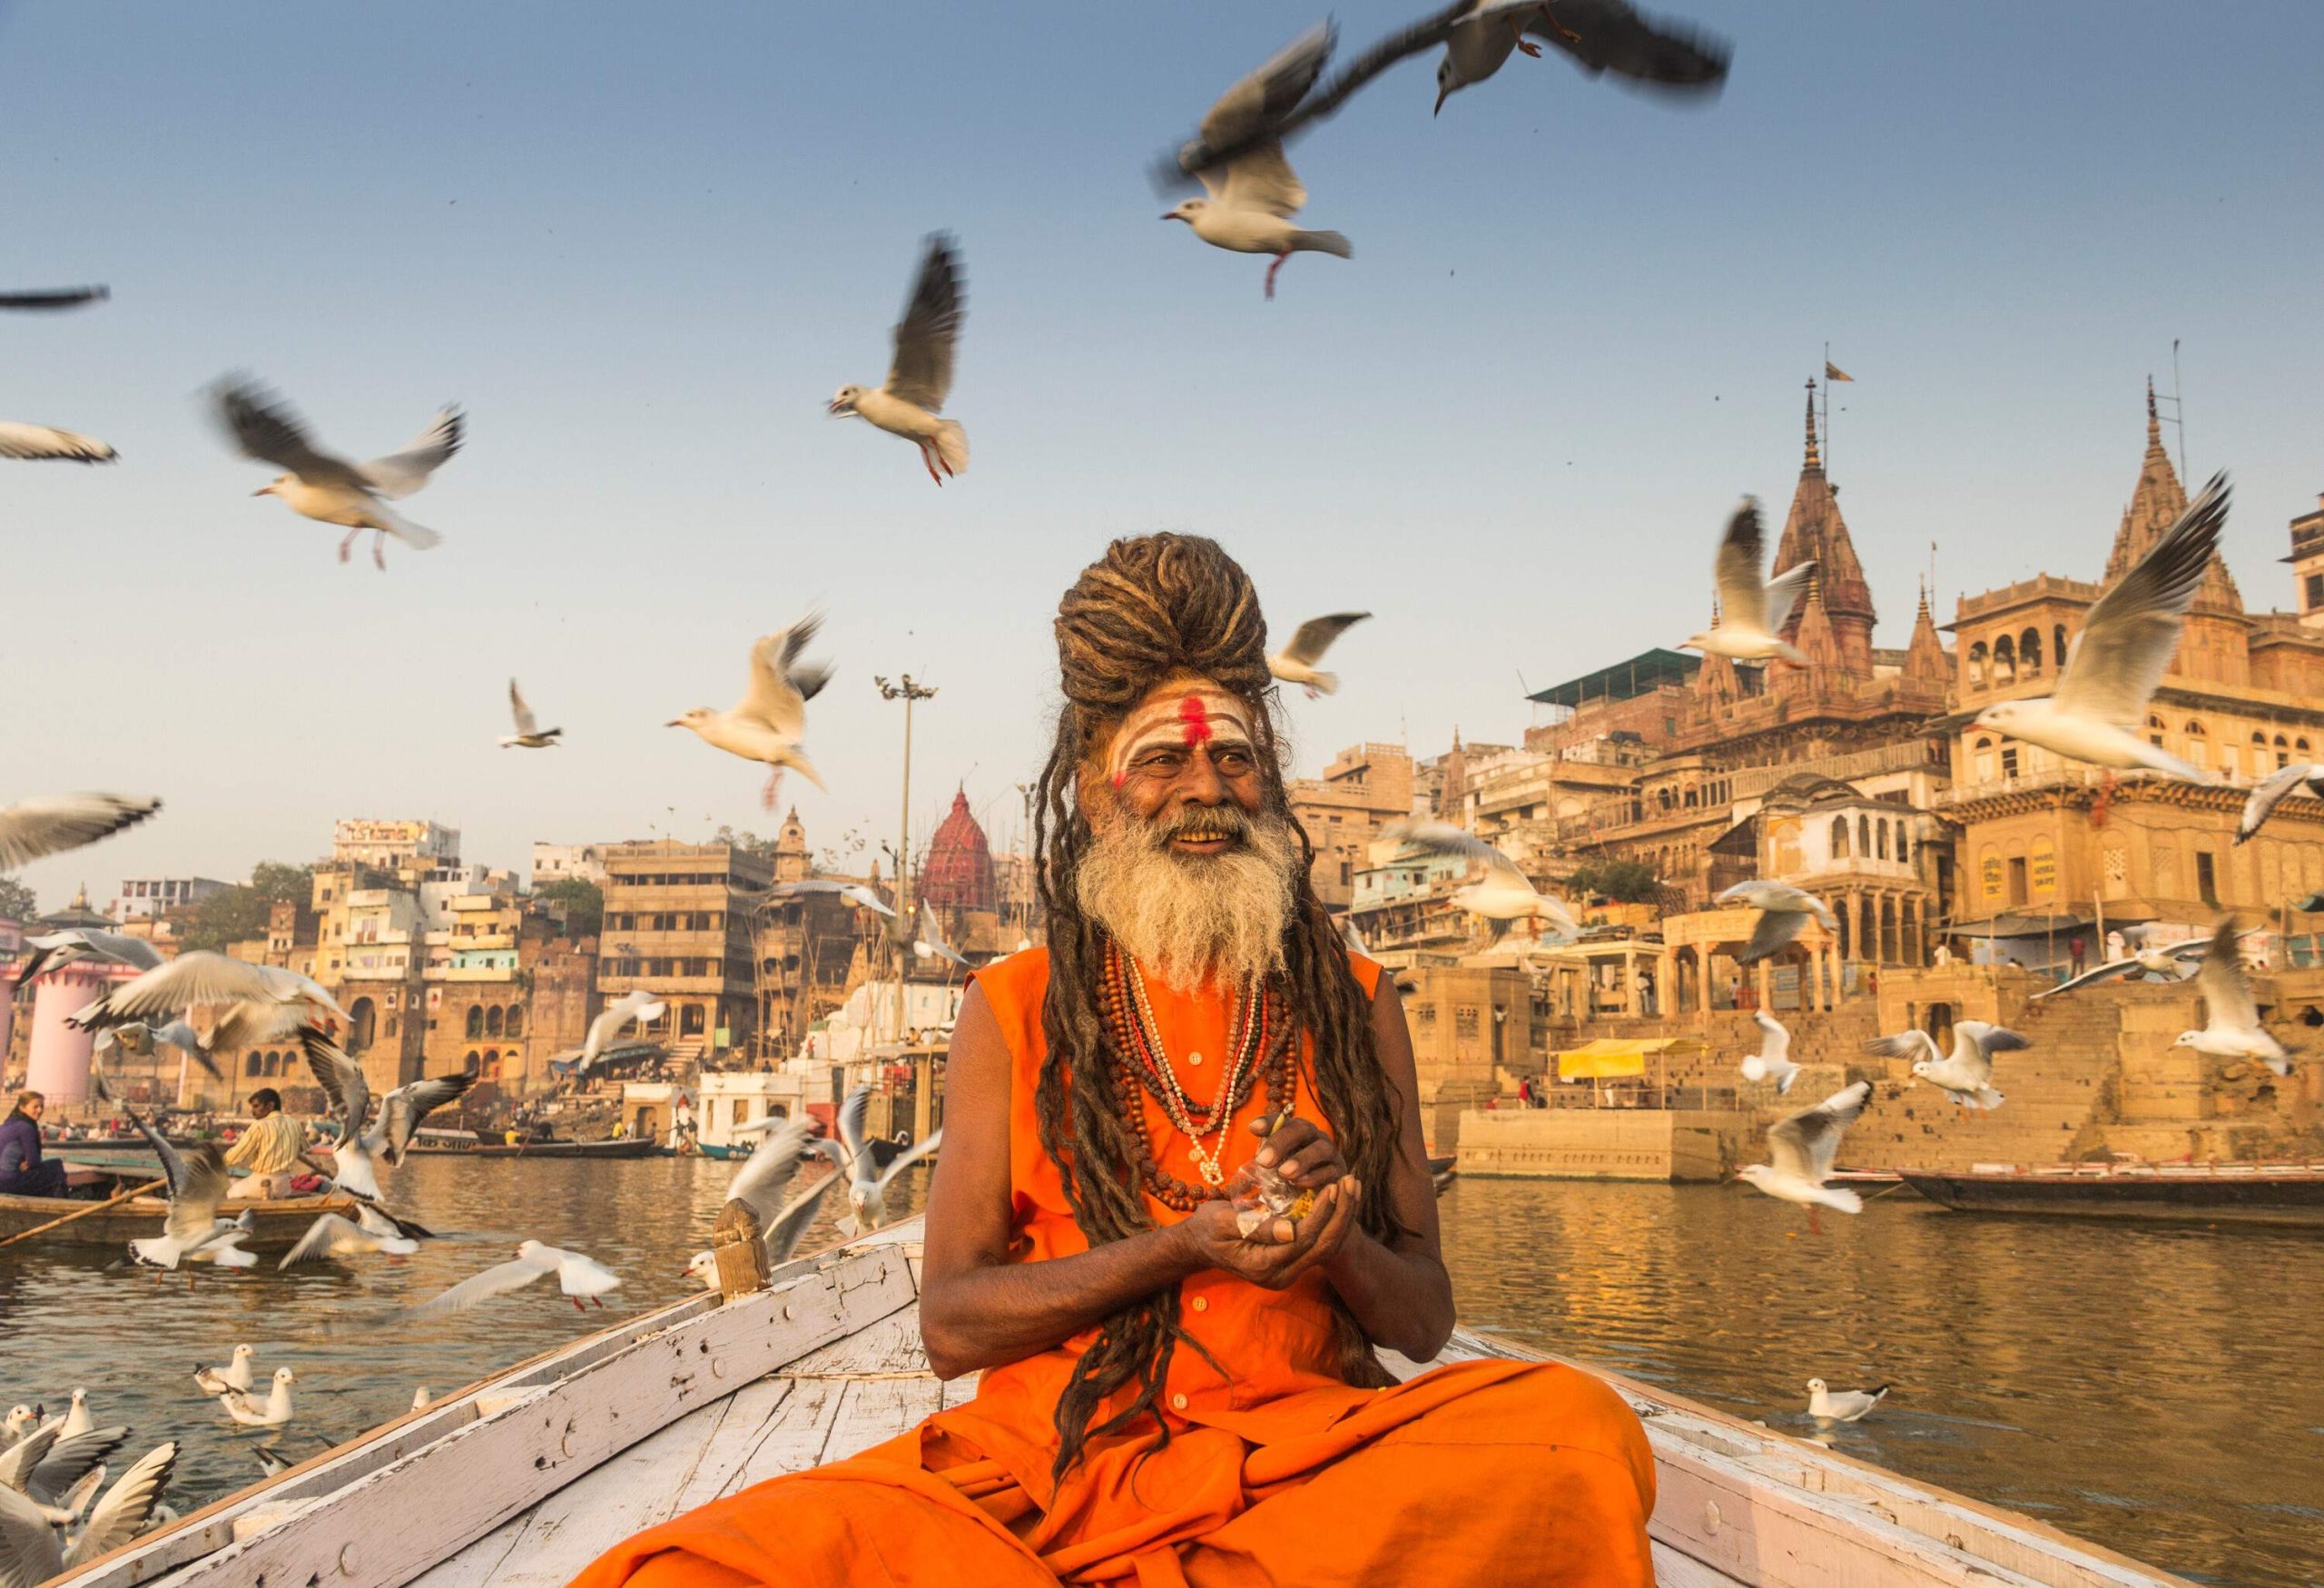 A sadhu wearing an orange saffron sits at the boat's bow, surrounded by flying birds while sailing in the river.